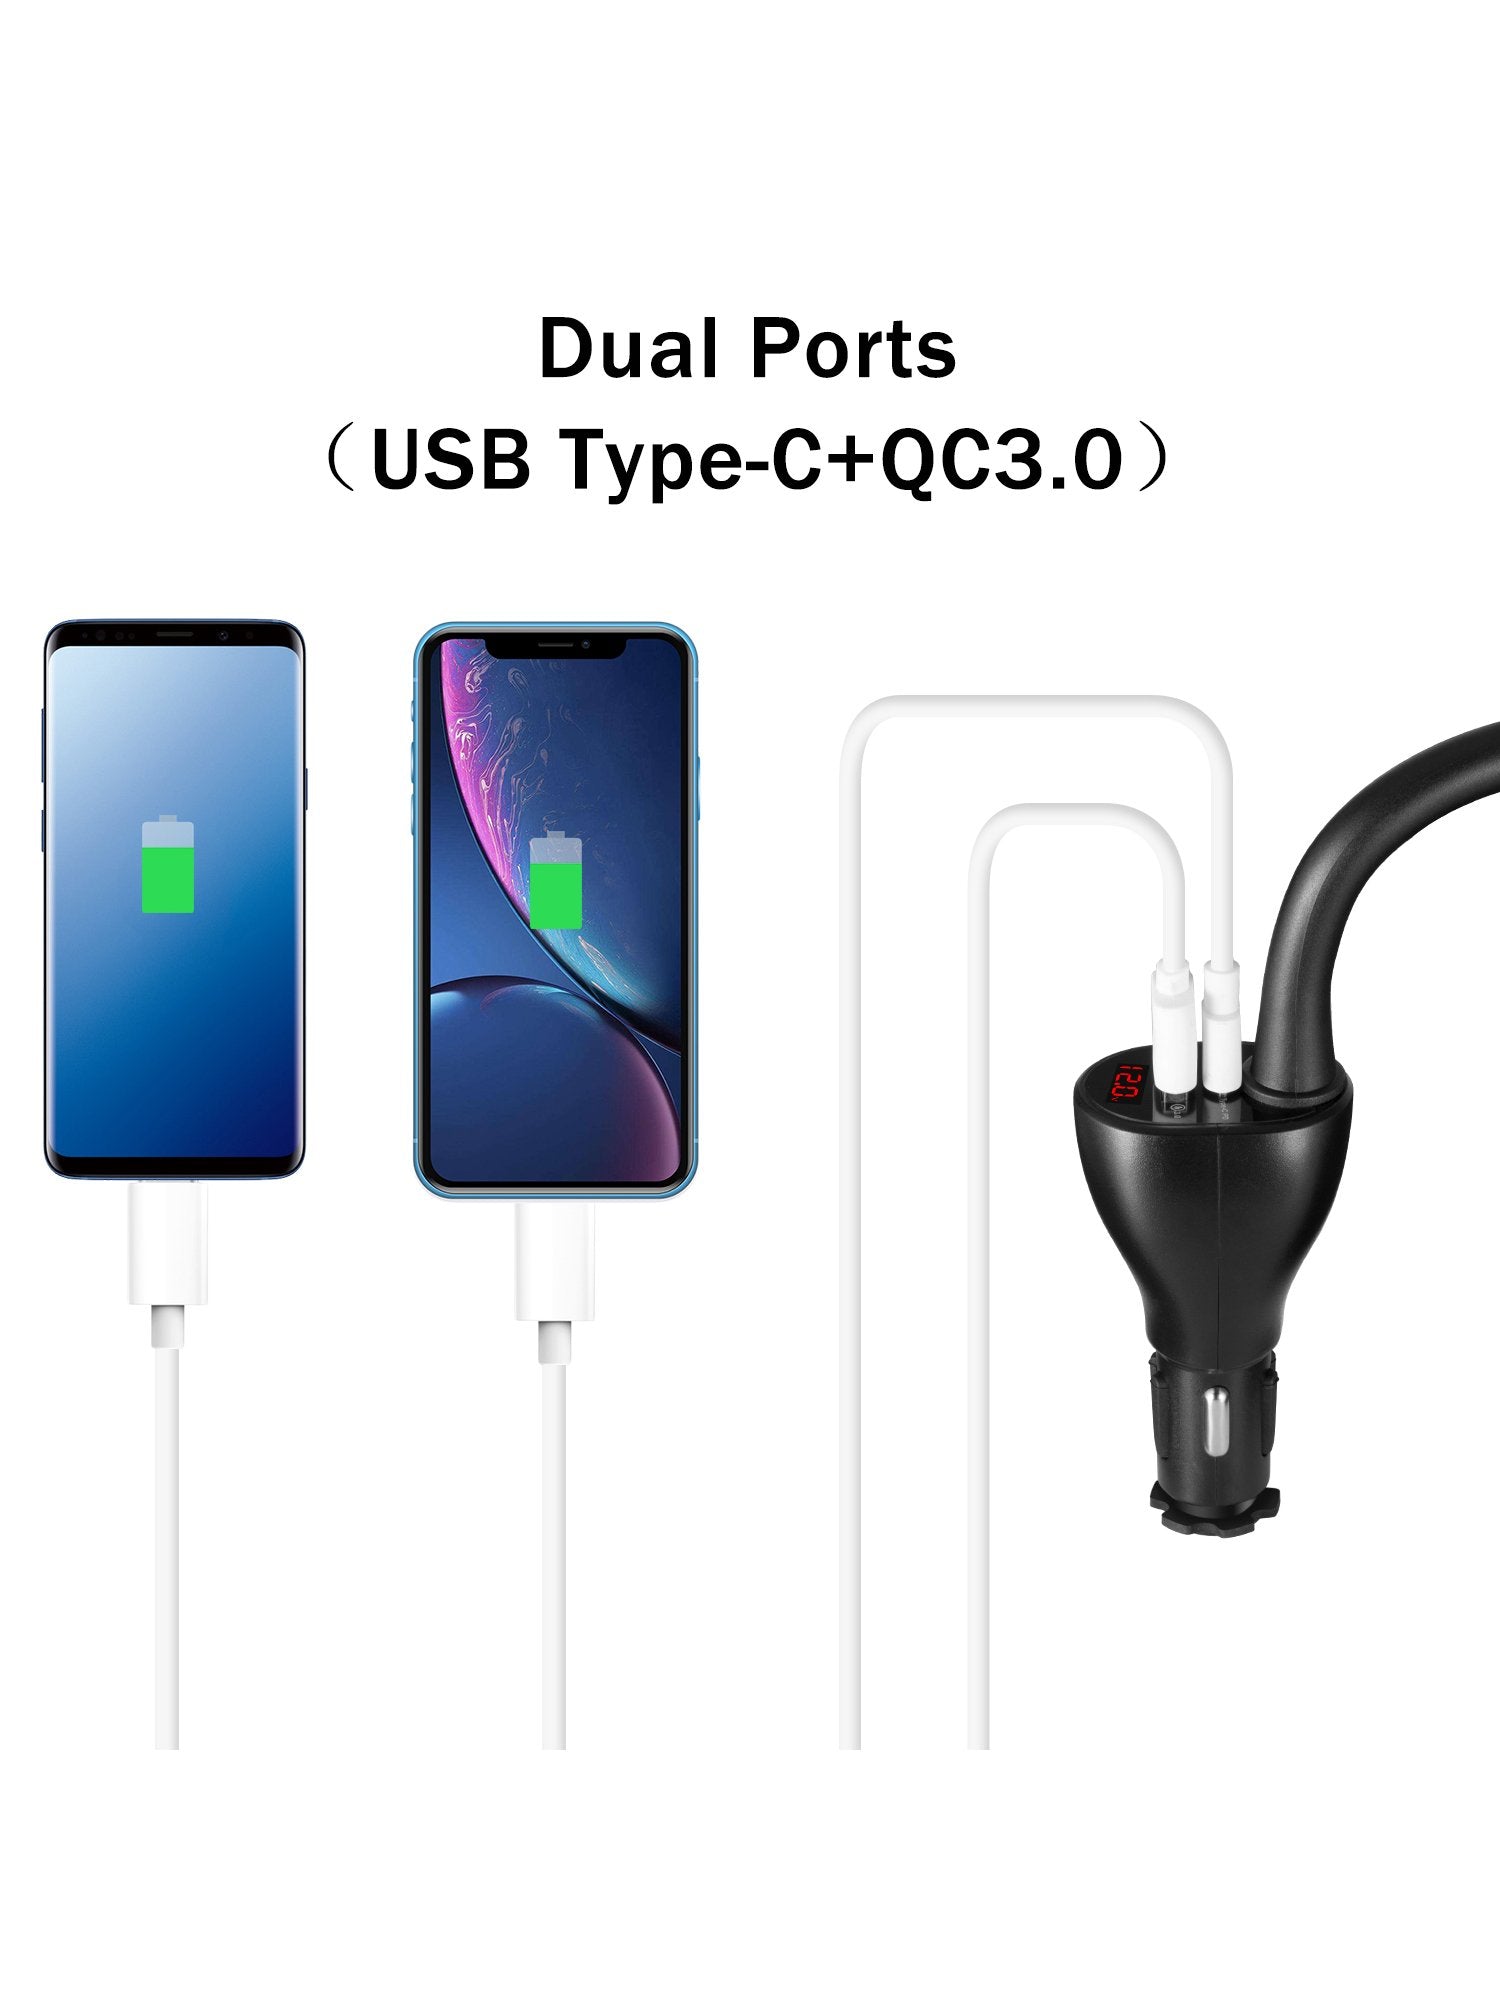 WALOTAR USB C PD Car Cigarette Lighter iPhone Mount Holder- Fast Car Charger 45W Power Delivery Dual Port(USB TypeC+QC3.0),Adjustable Cell Phone Cradle with USB C to Lightning Cable